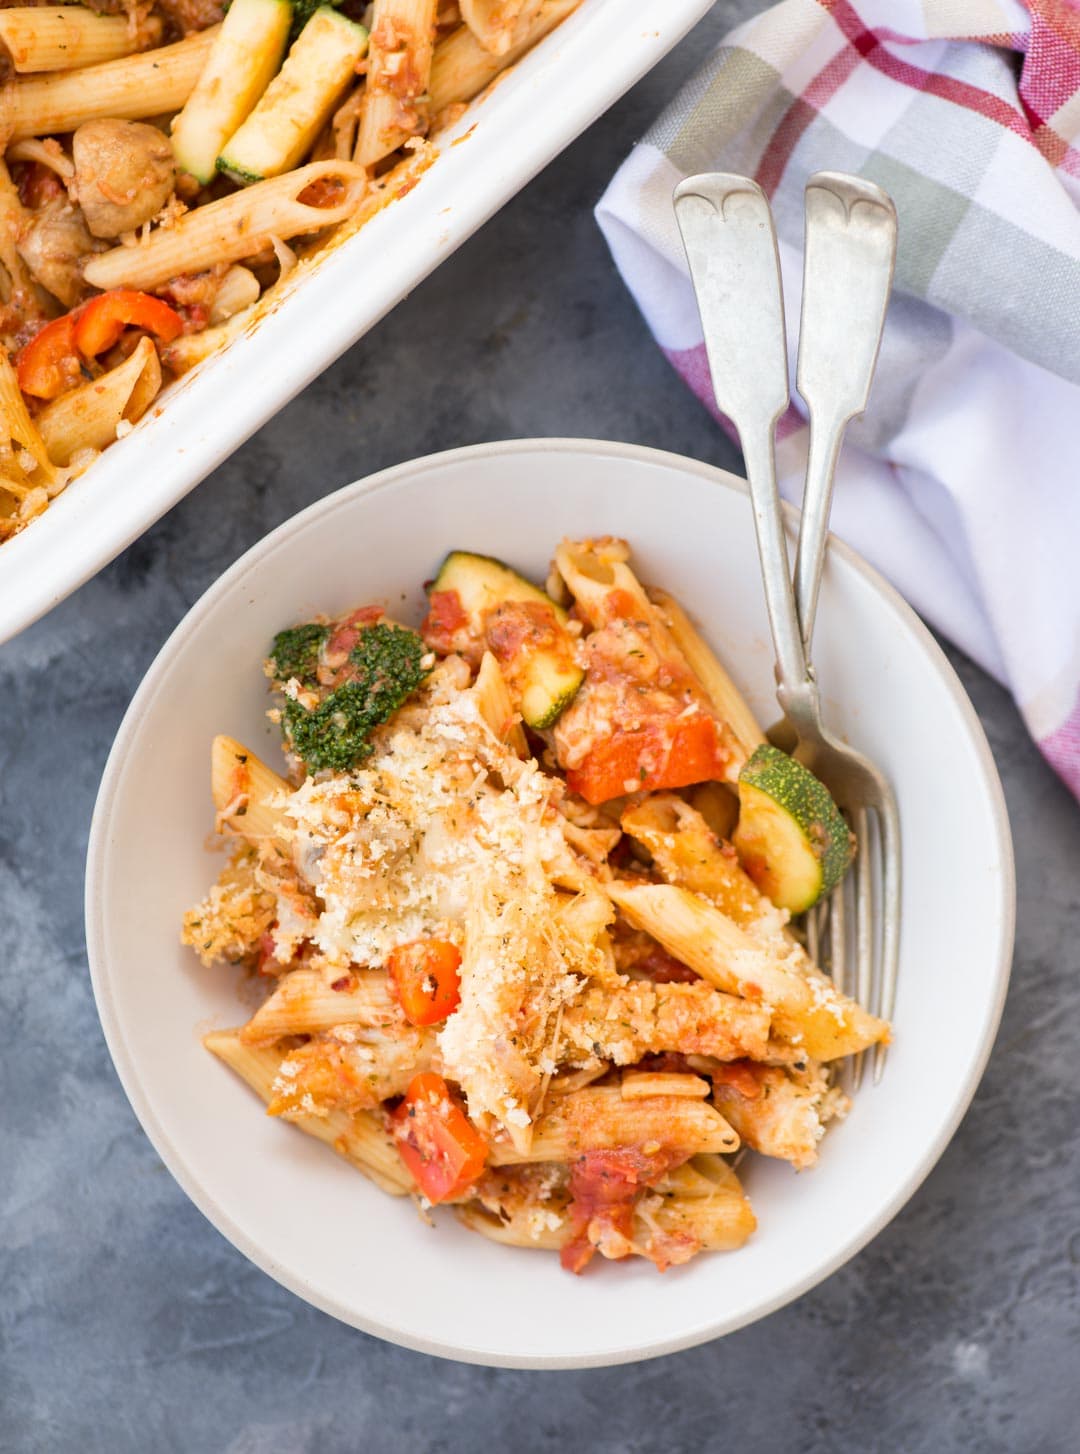 EASY VEGETABLE PASTA BAKE - The flavours of kitchen